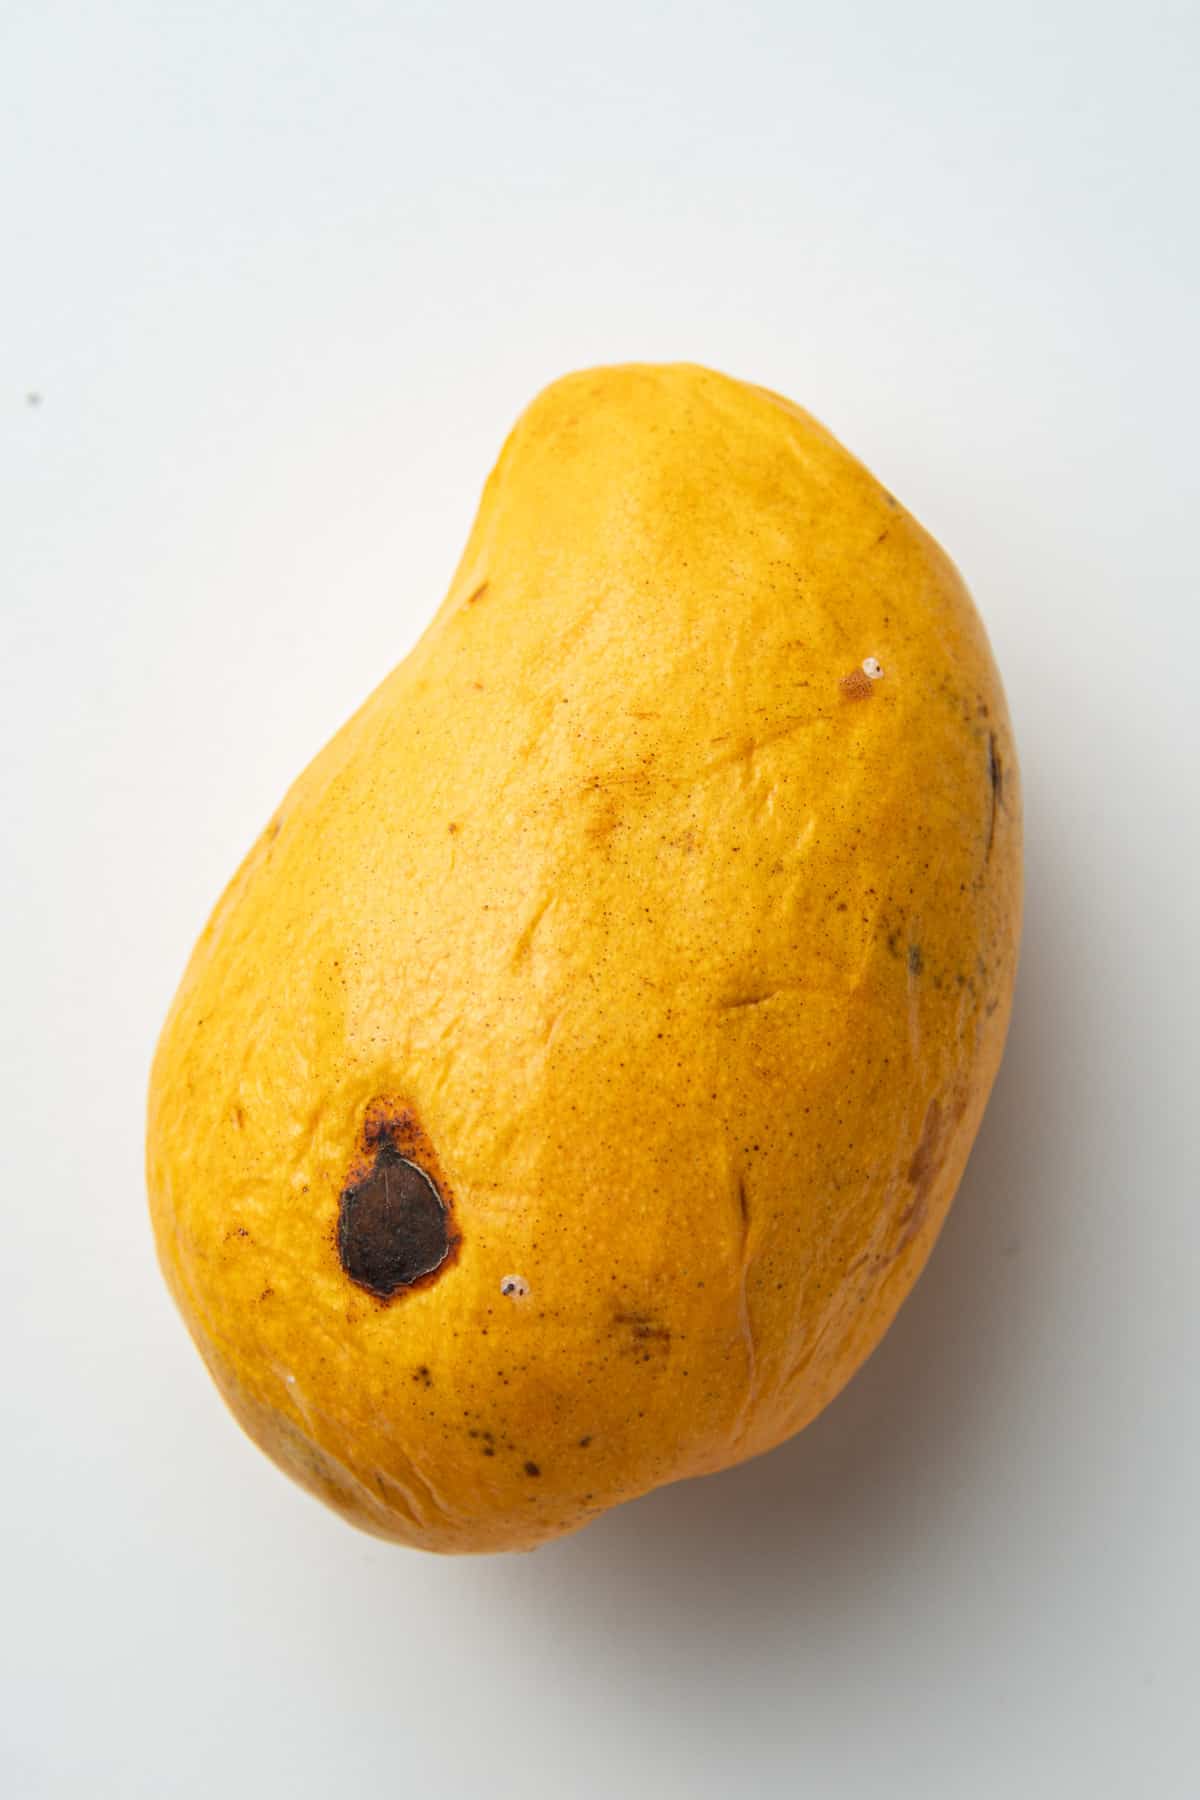 Ripe mango with a black spot on the surface.